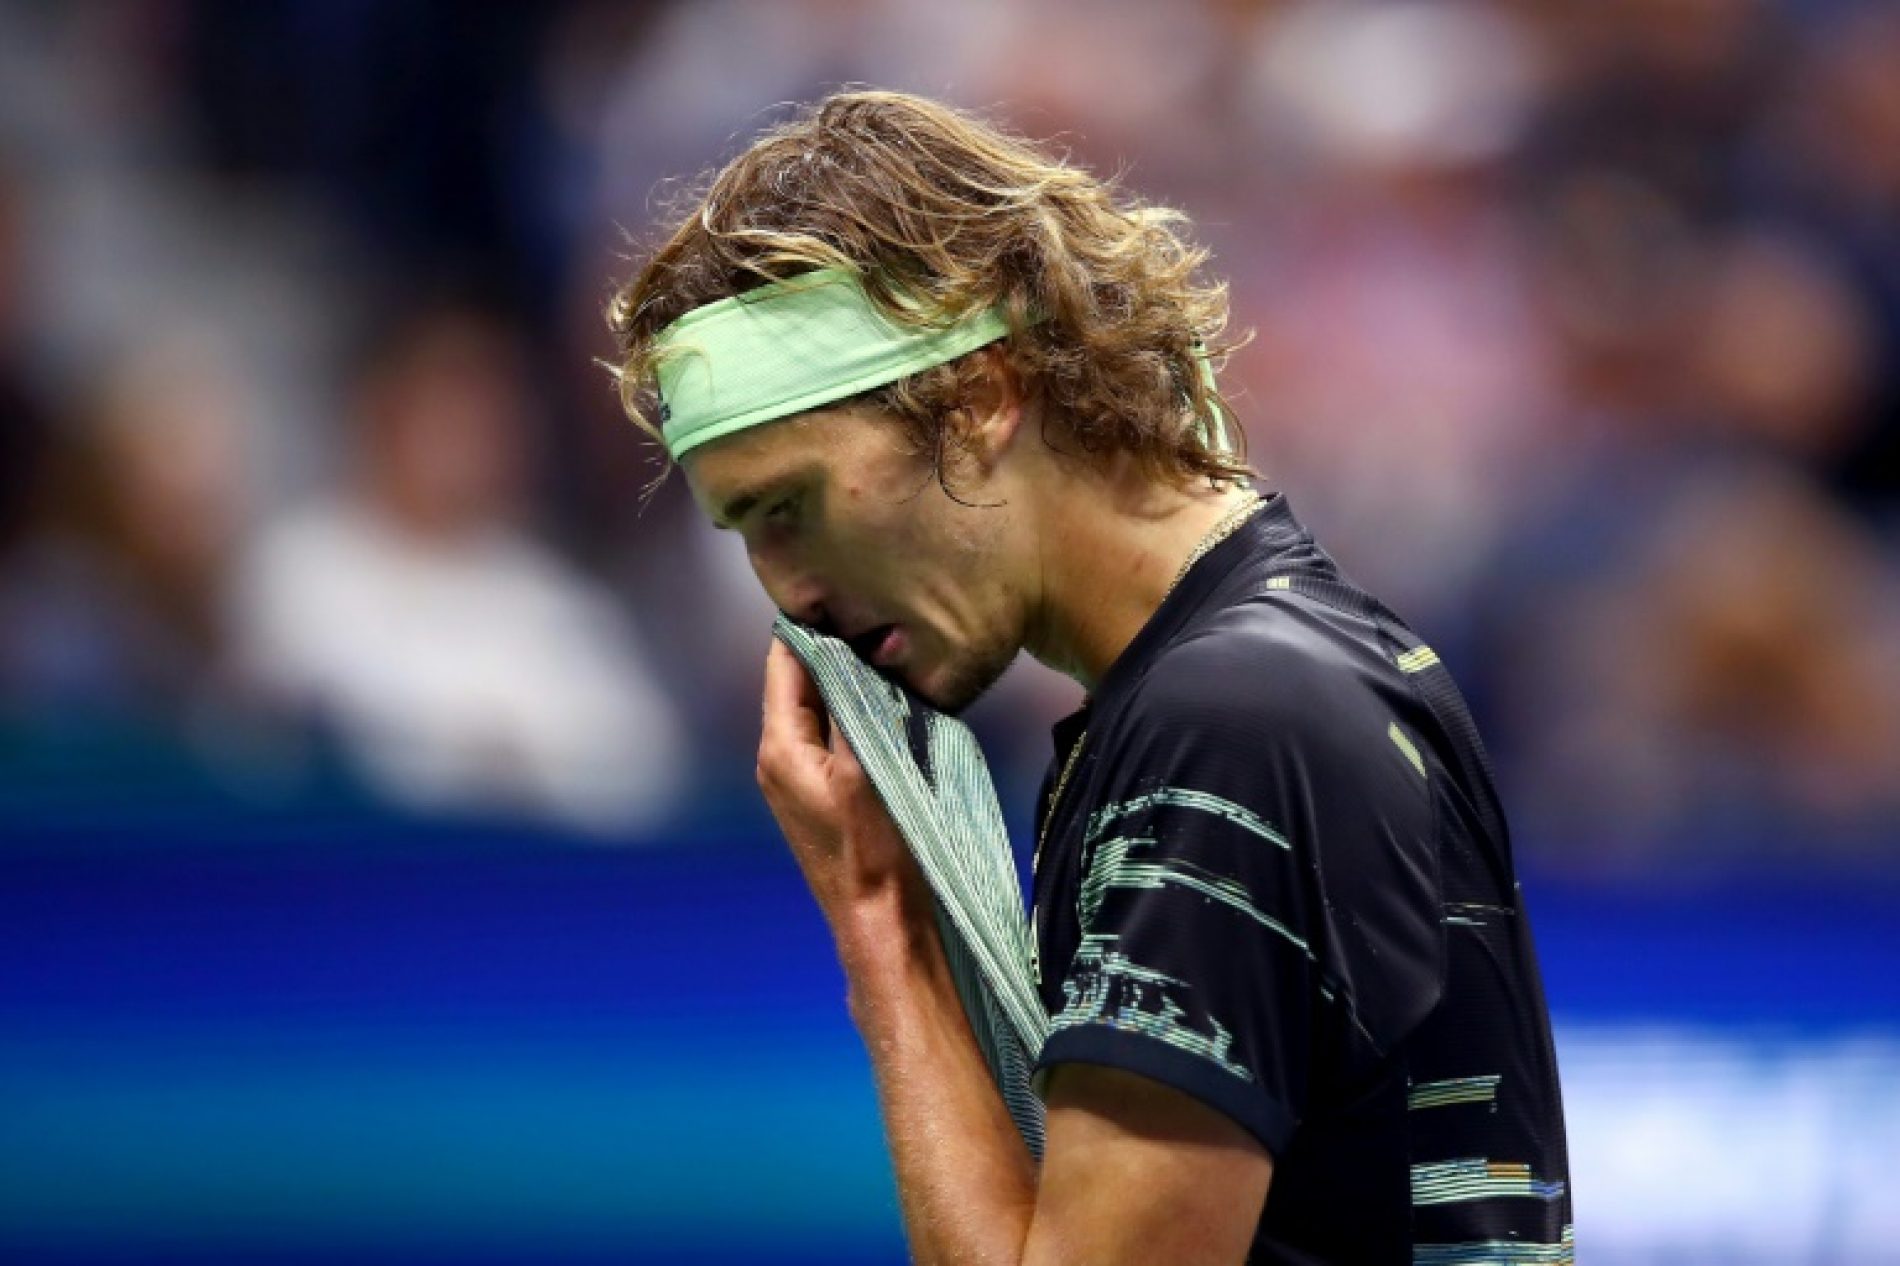 Zverev Loses at US Open as Nadal Faces Former Champion